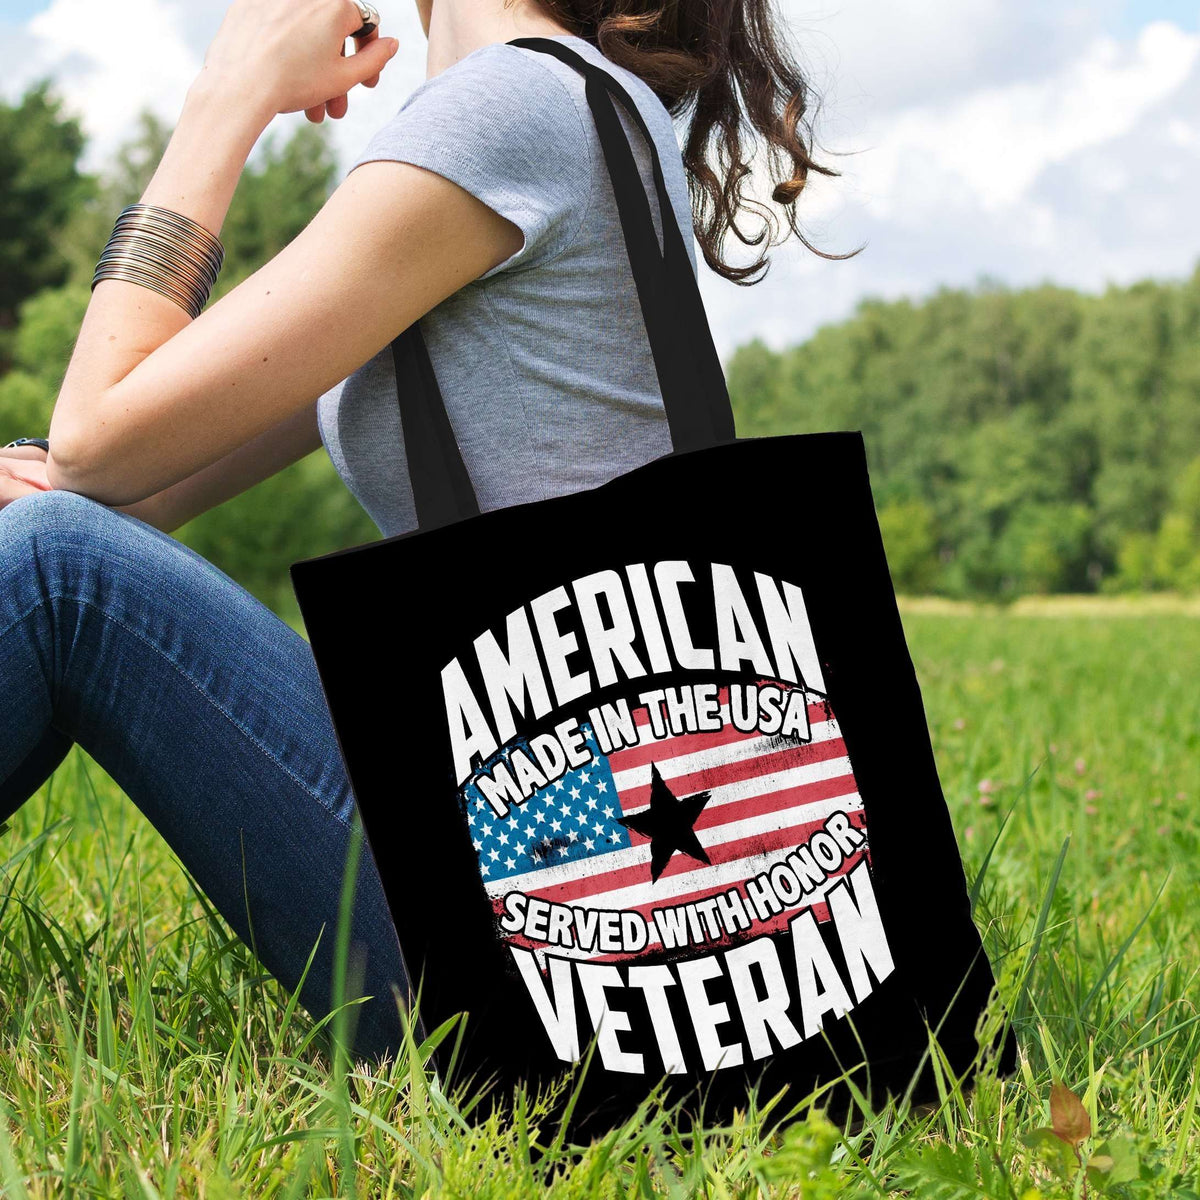 Designs by MyUtopia Shout Out:American Veteran Made in the USA Served With Honor Fabric Totebag Reusable Shopping Tote